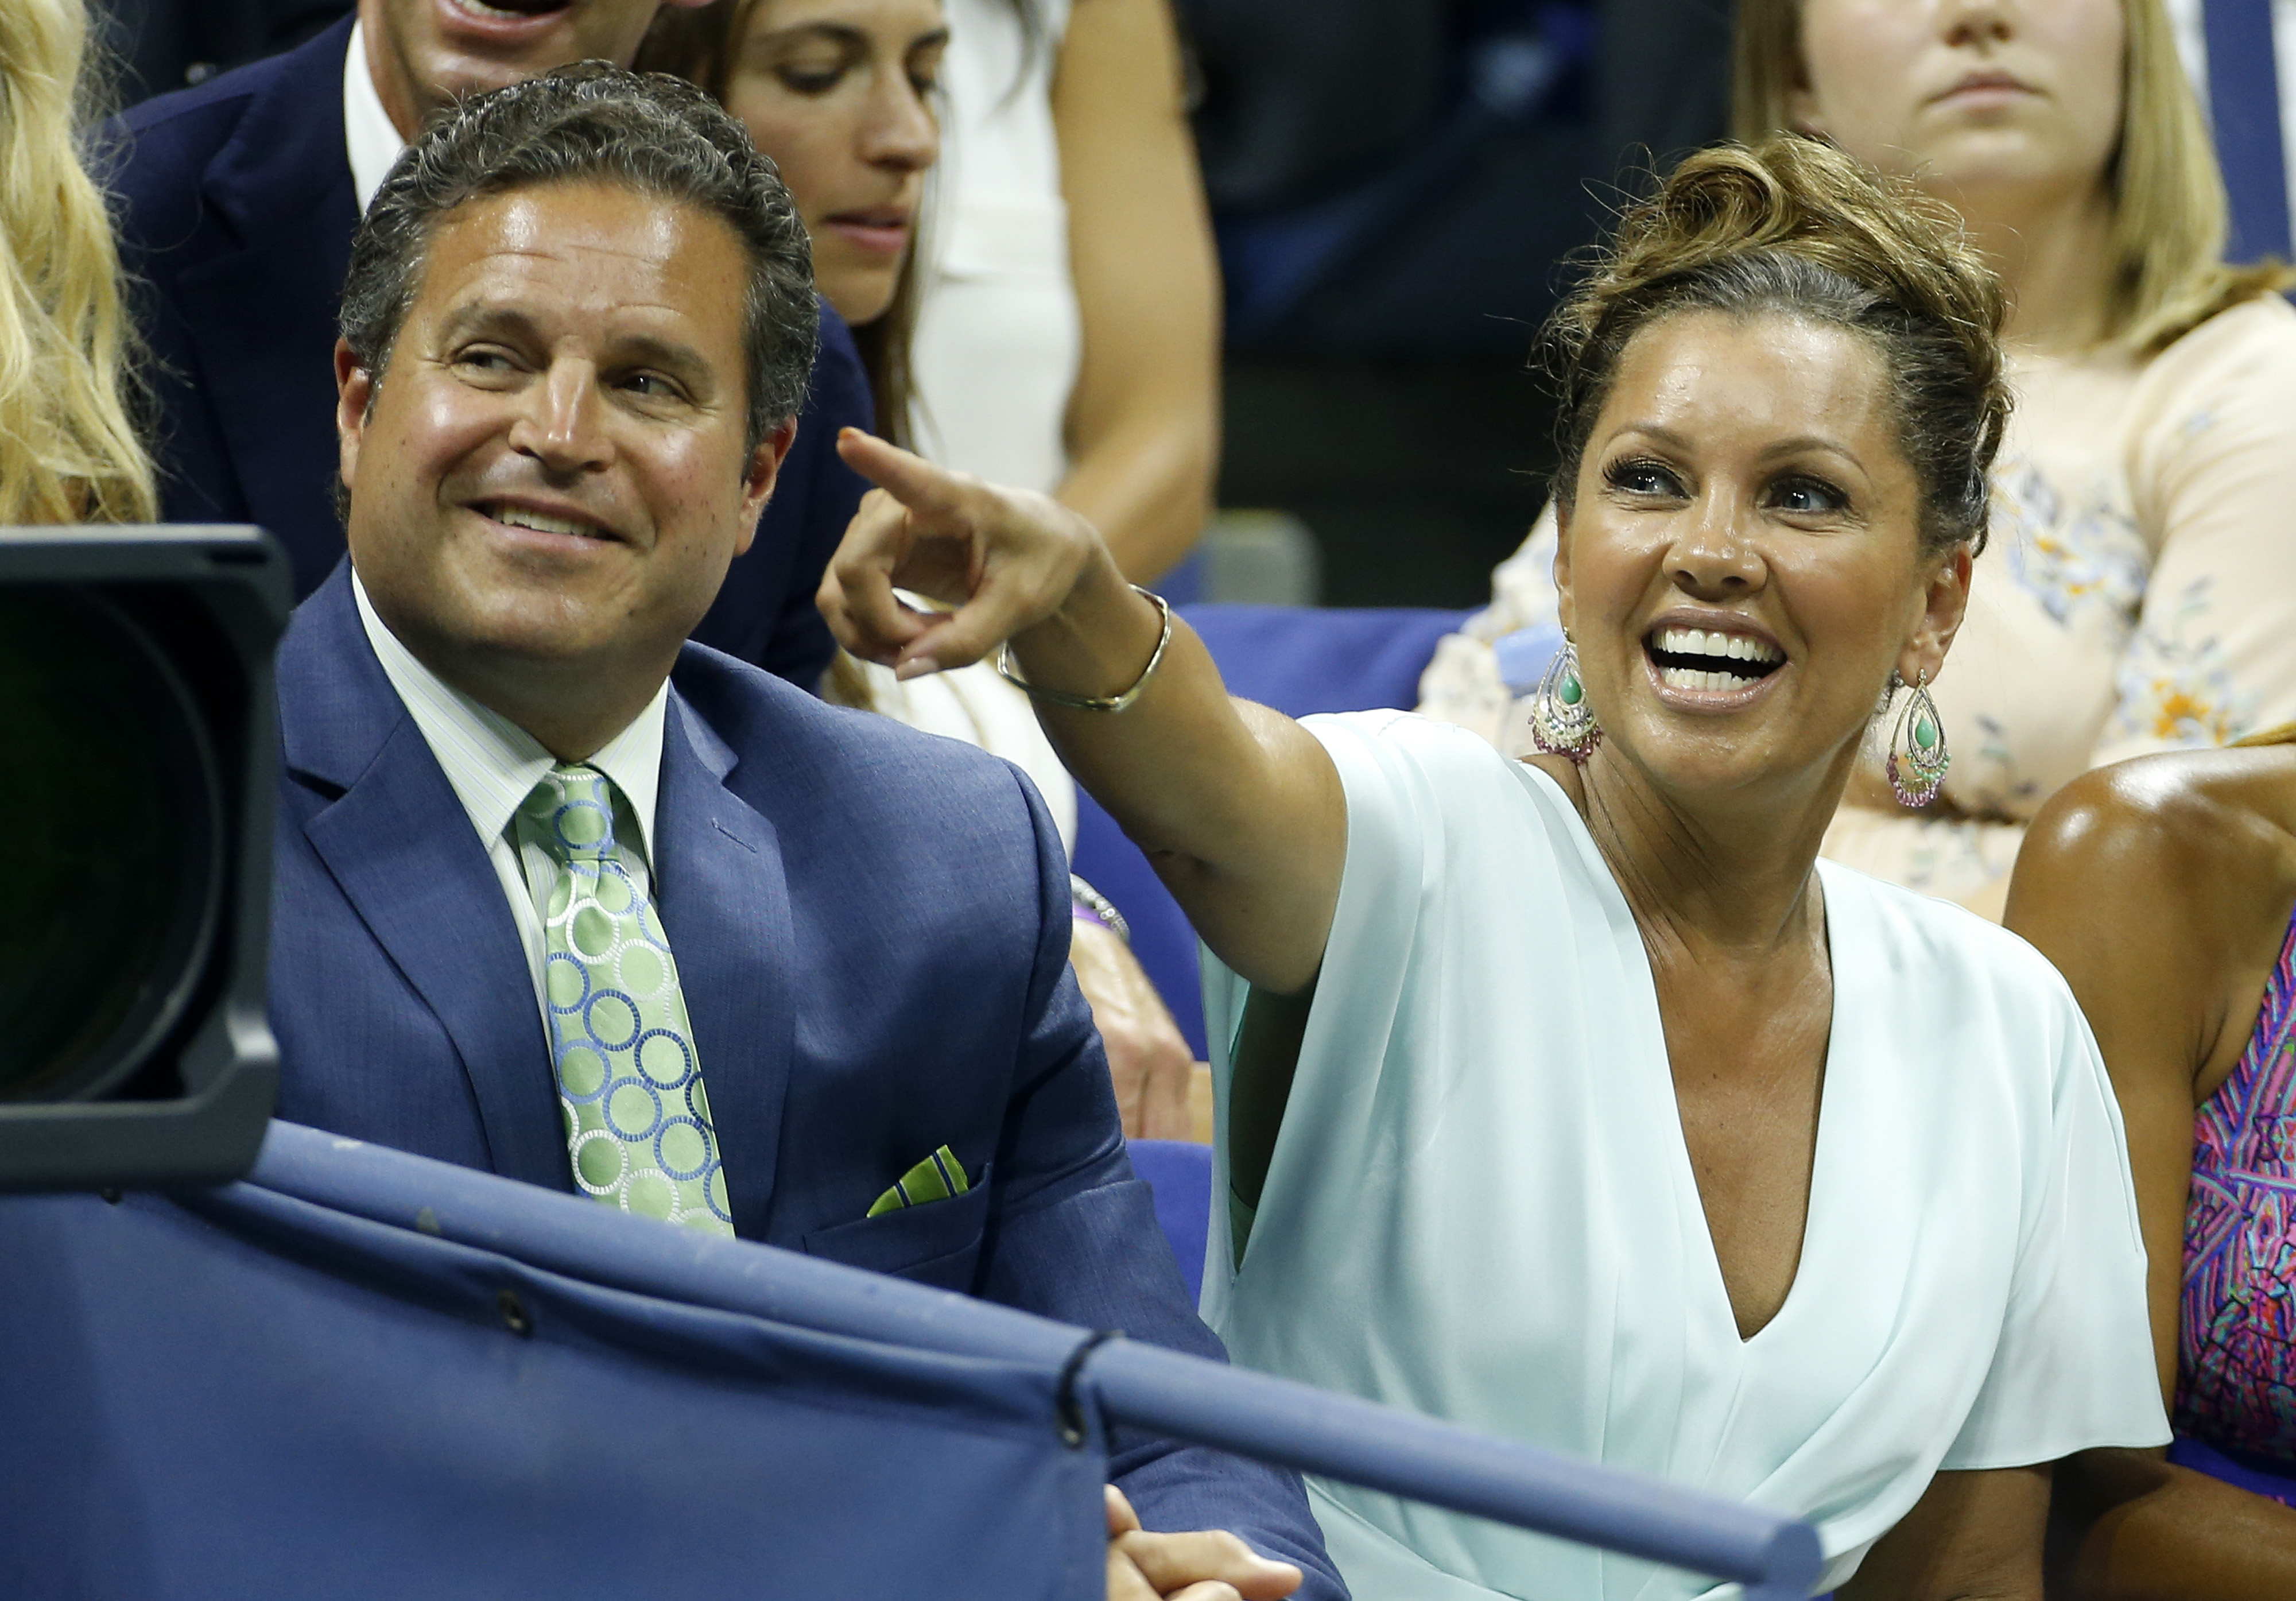 Jim Skrip and Vanessa Williams at the 15th Annual USTA Opening Night Gala at the US Open on August 31, 2015, in the Flushing neighborhood of the Queens borough of New York City | Source: Getty Images